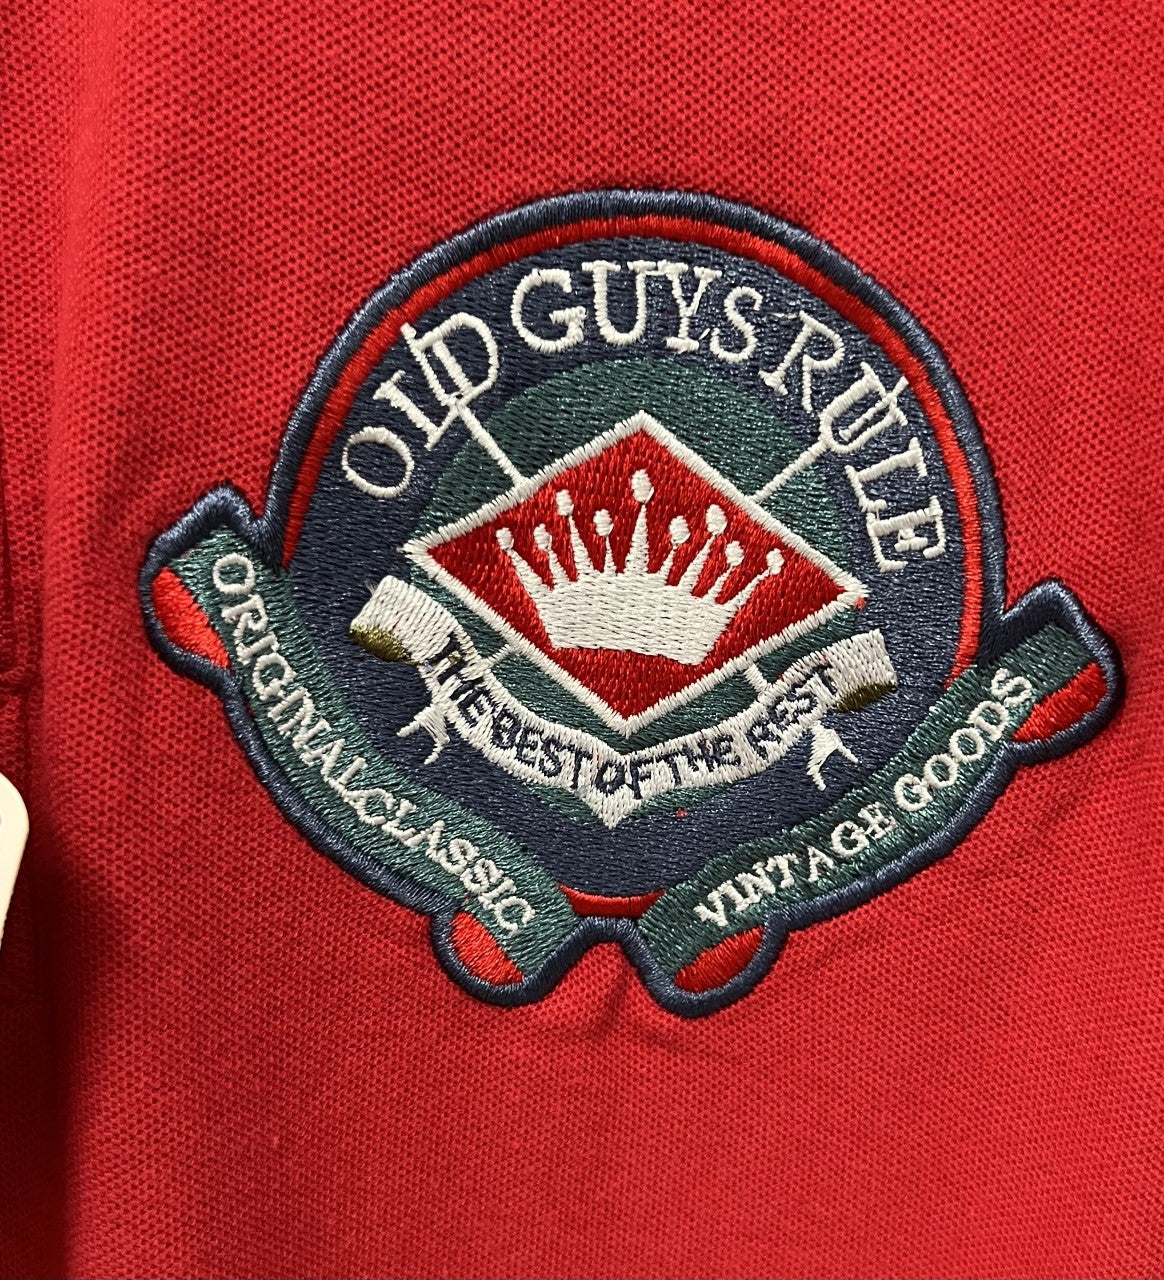 Old Guys Rule - Vintage Red Polo Collared Shirt